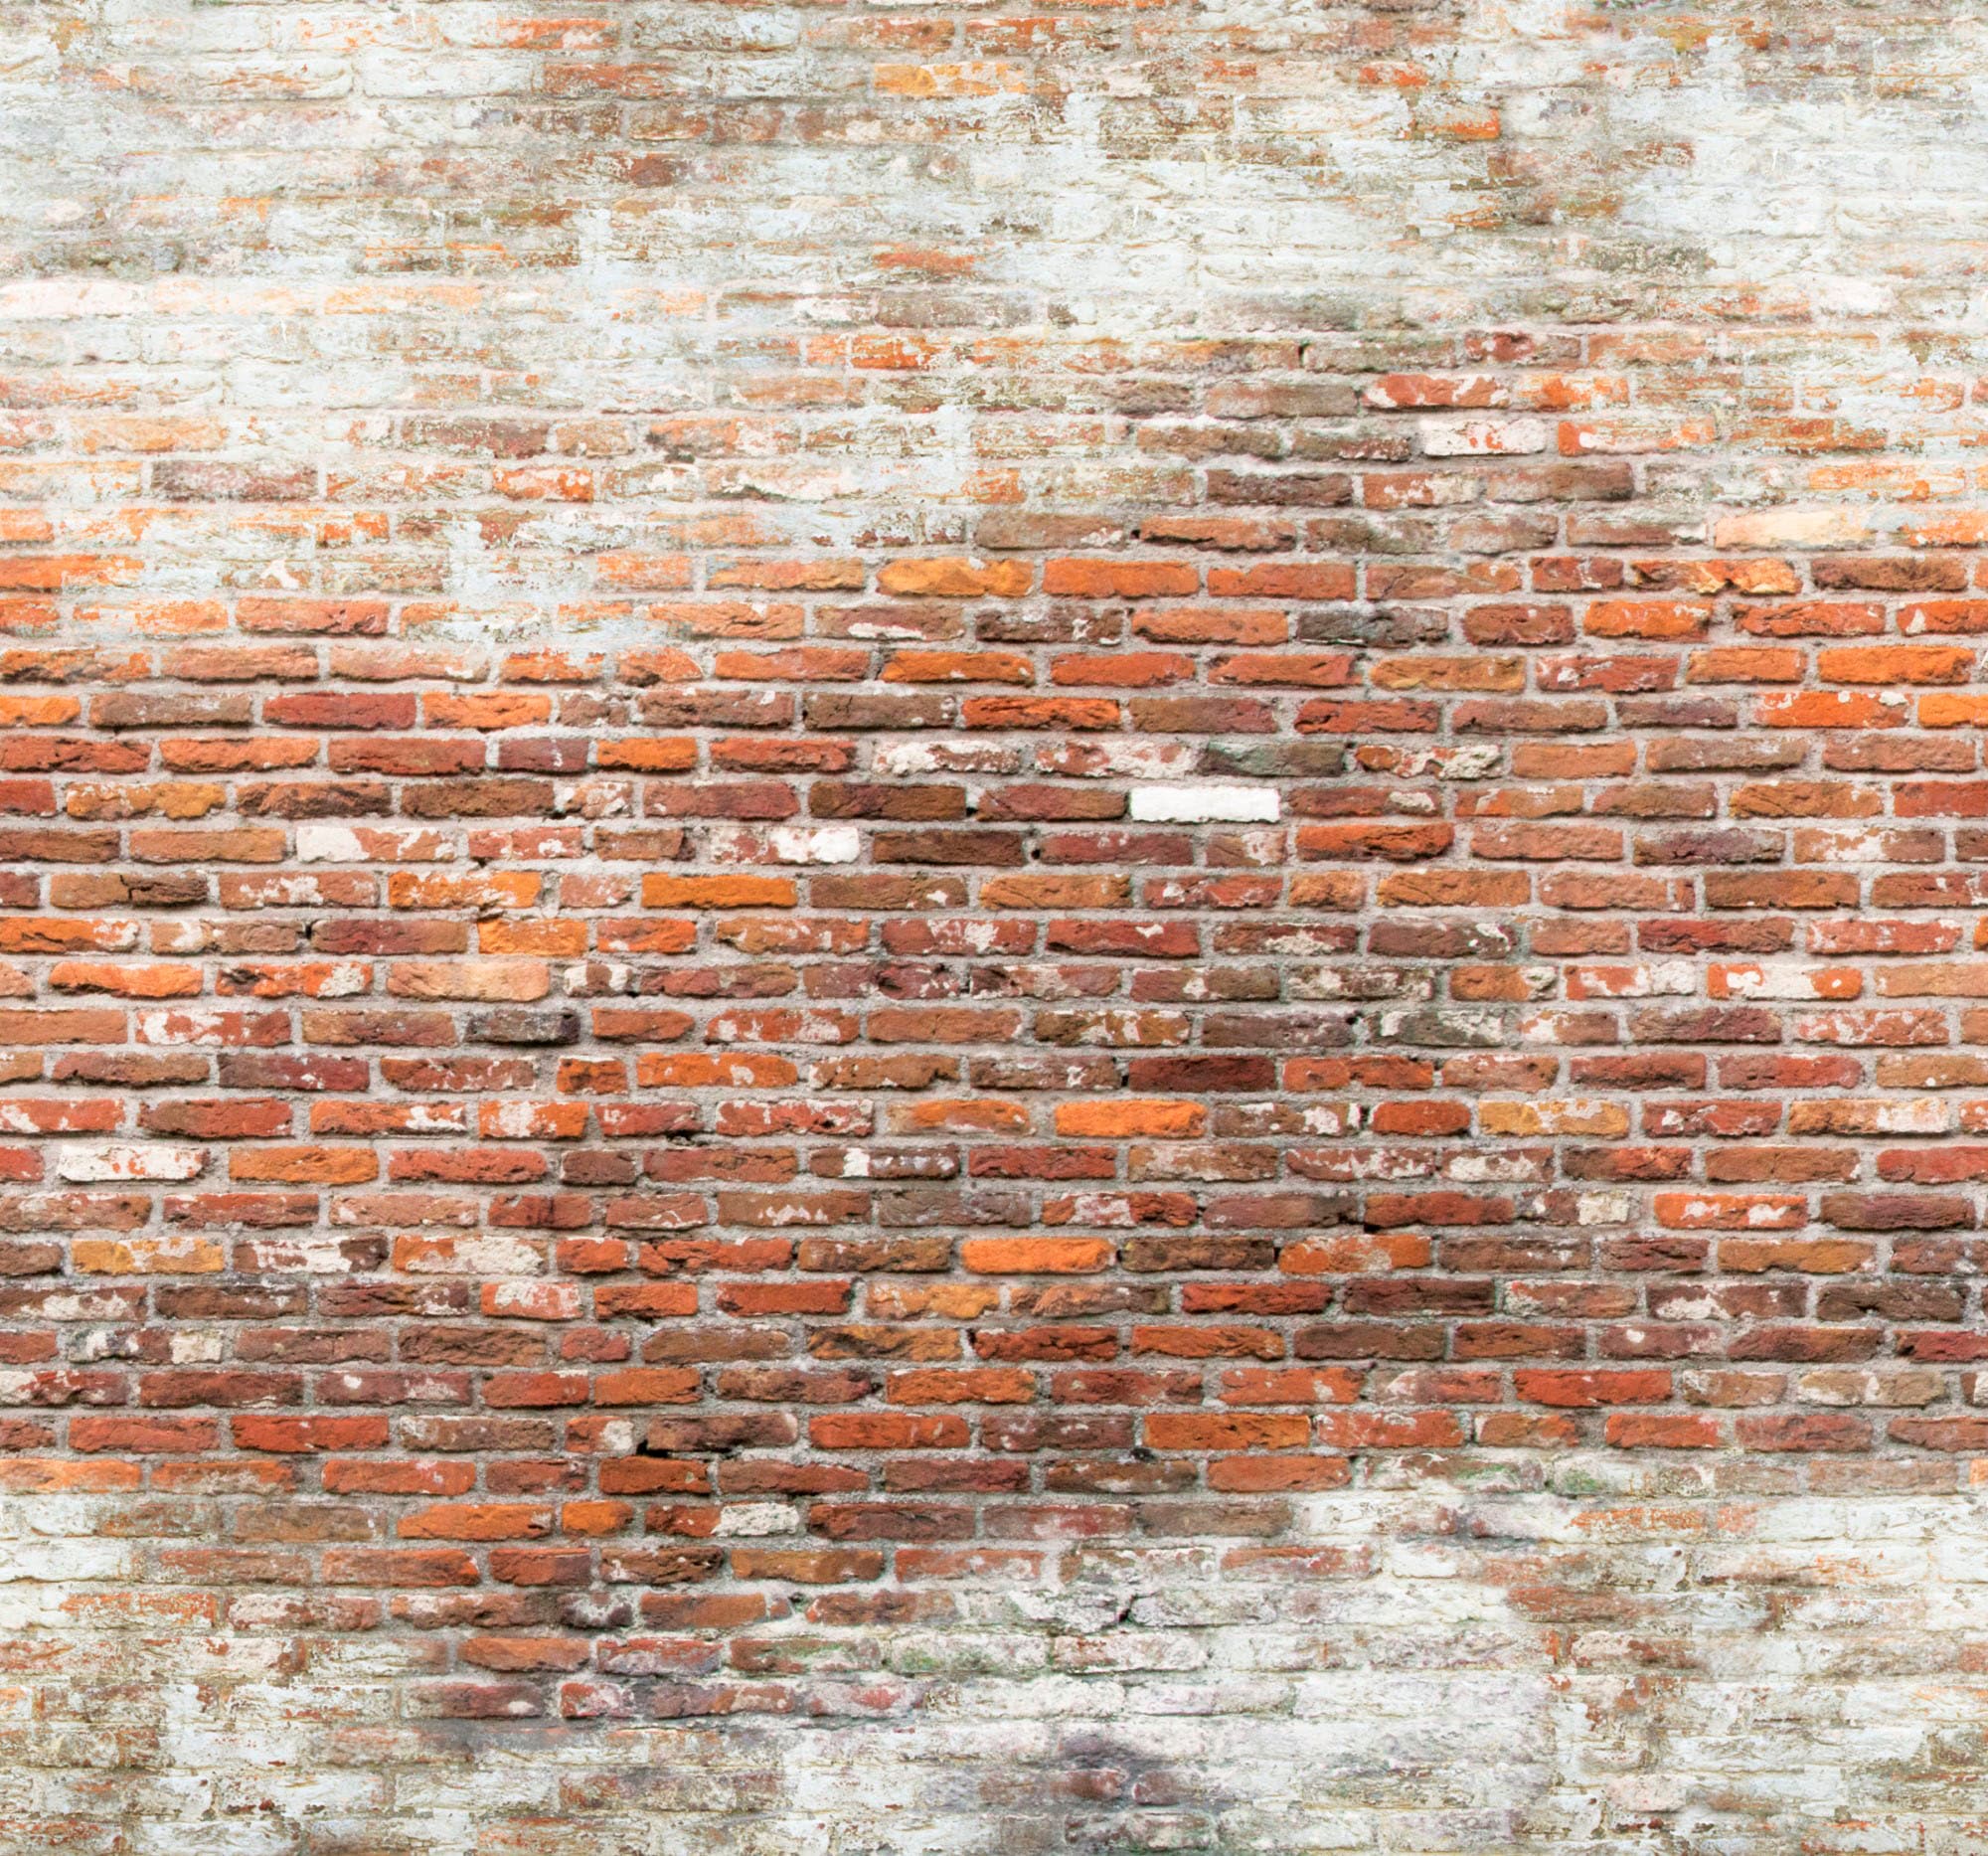 Art for the home Fototapete "Brick wall 2"